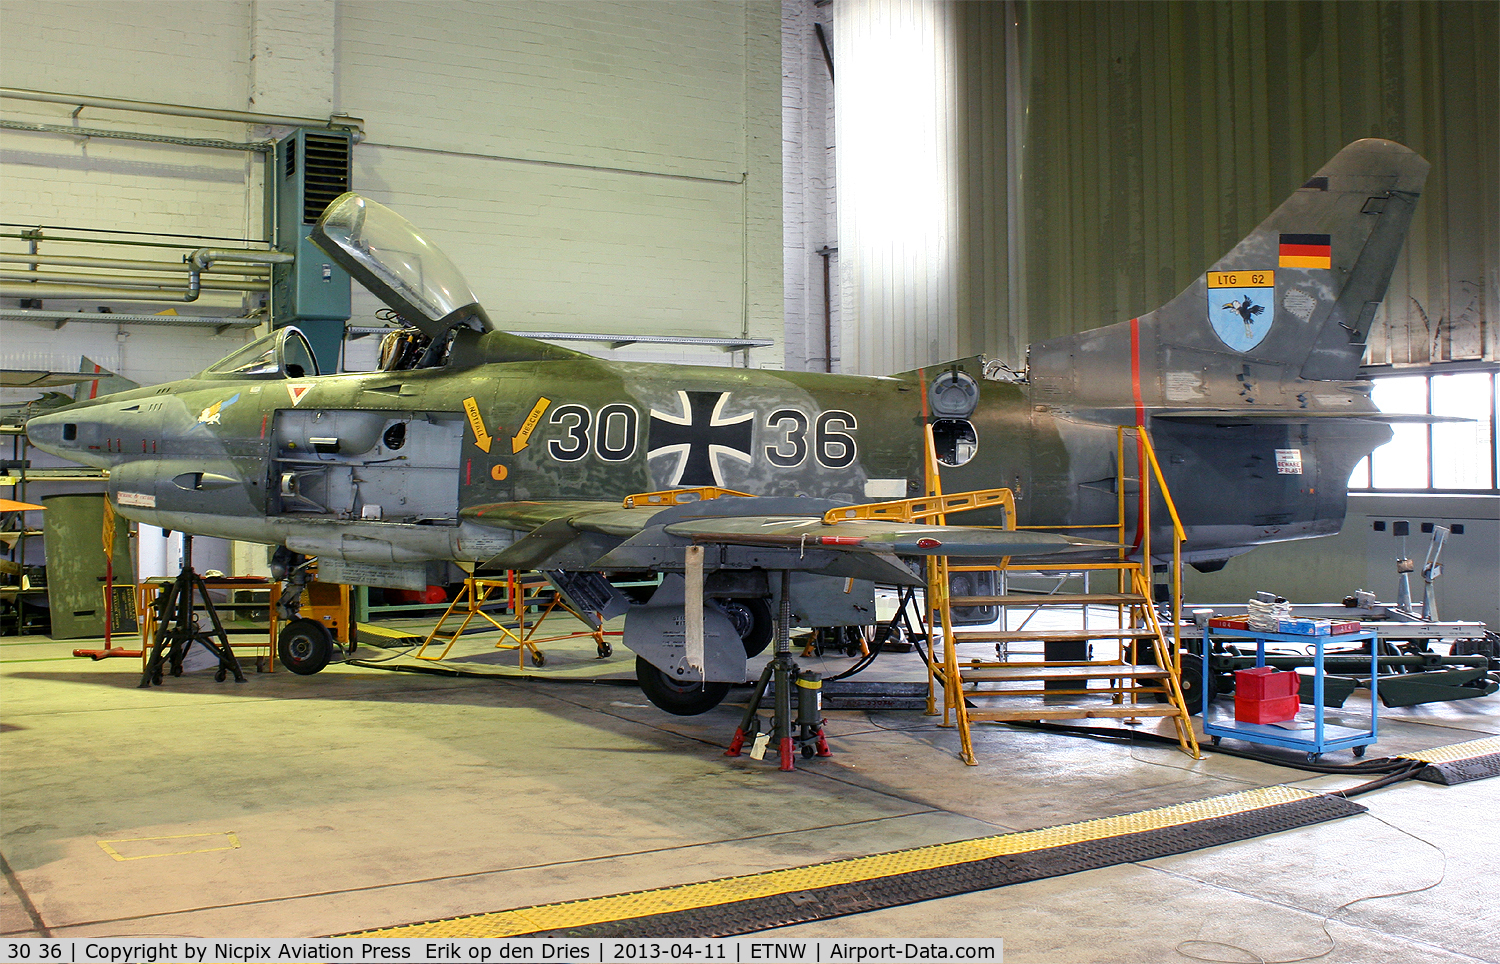 30 36, Fiat G-91R/3 C/N D96, 3036 was obtained from Army Base Laupheim as the badge on the nose shows.